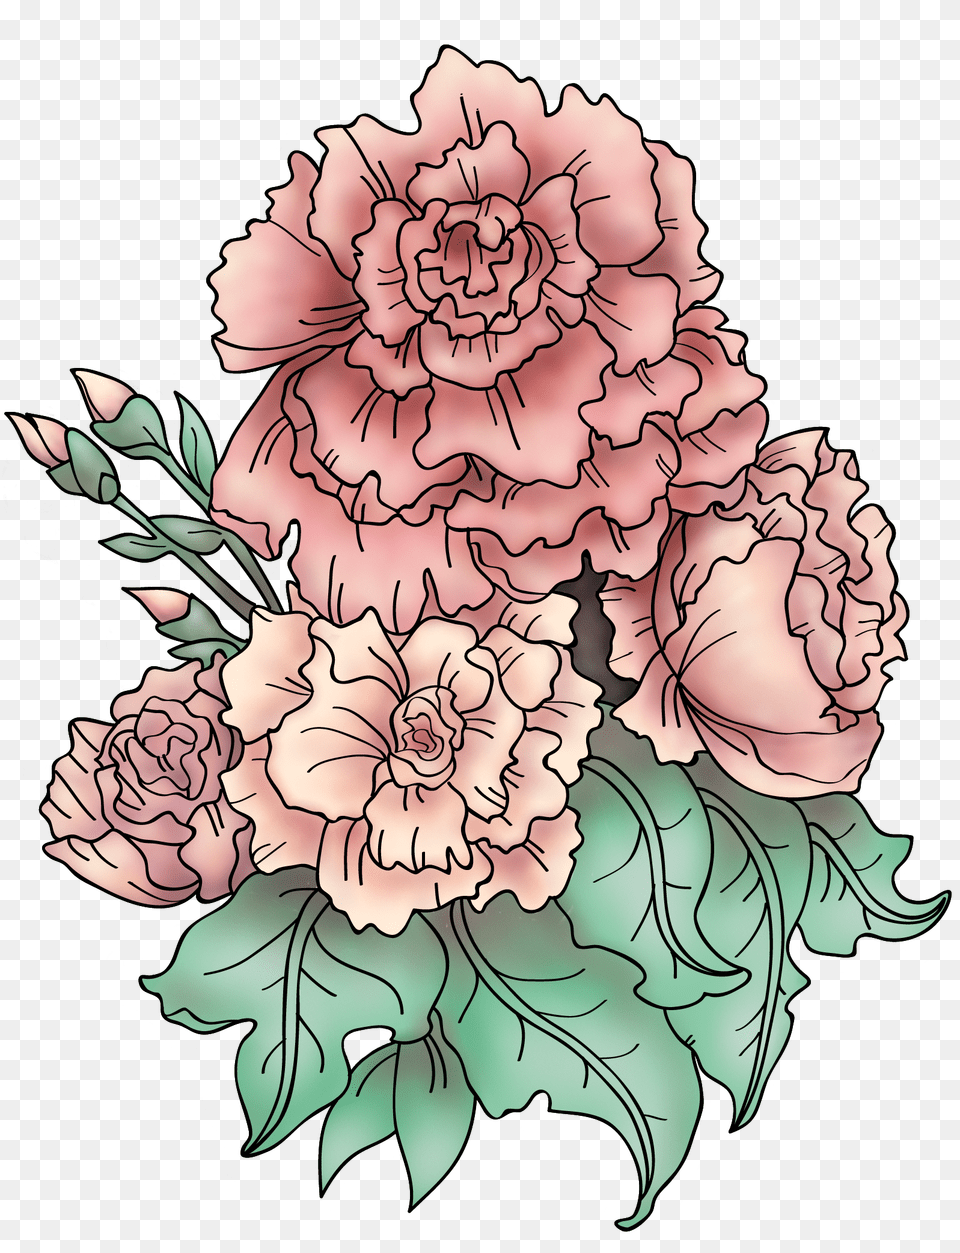 Download Tattoo Design Based Carnation Flower Carnation Tattoo Meaning, Plant, Baby, Person Free Png